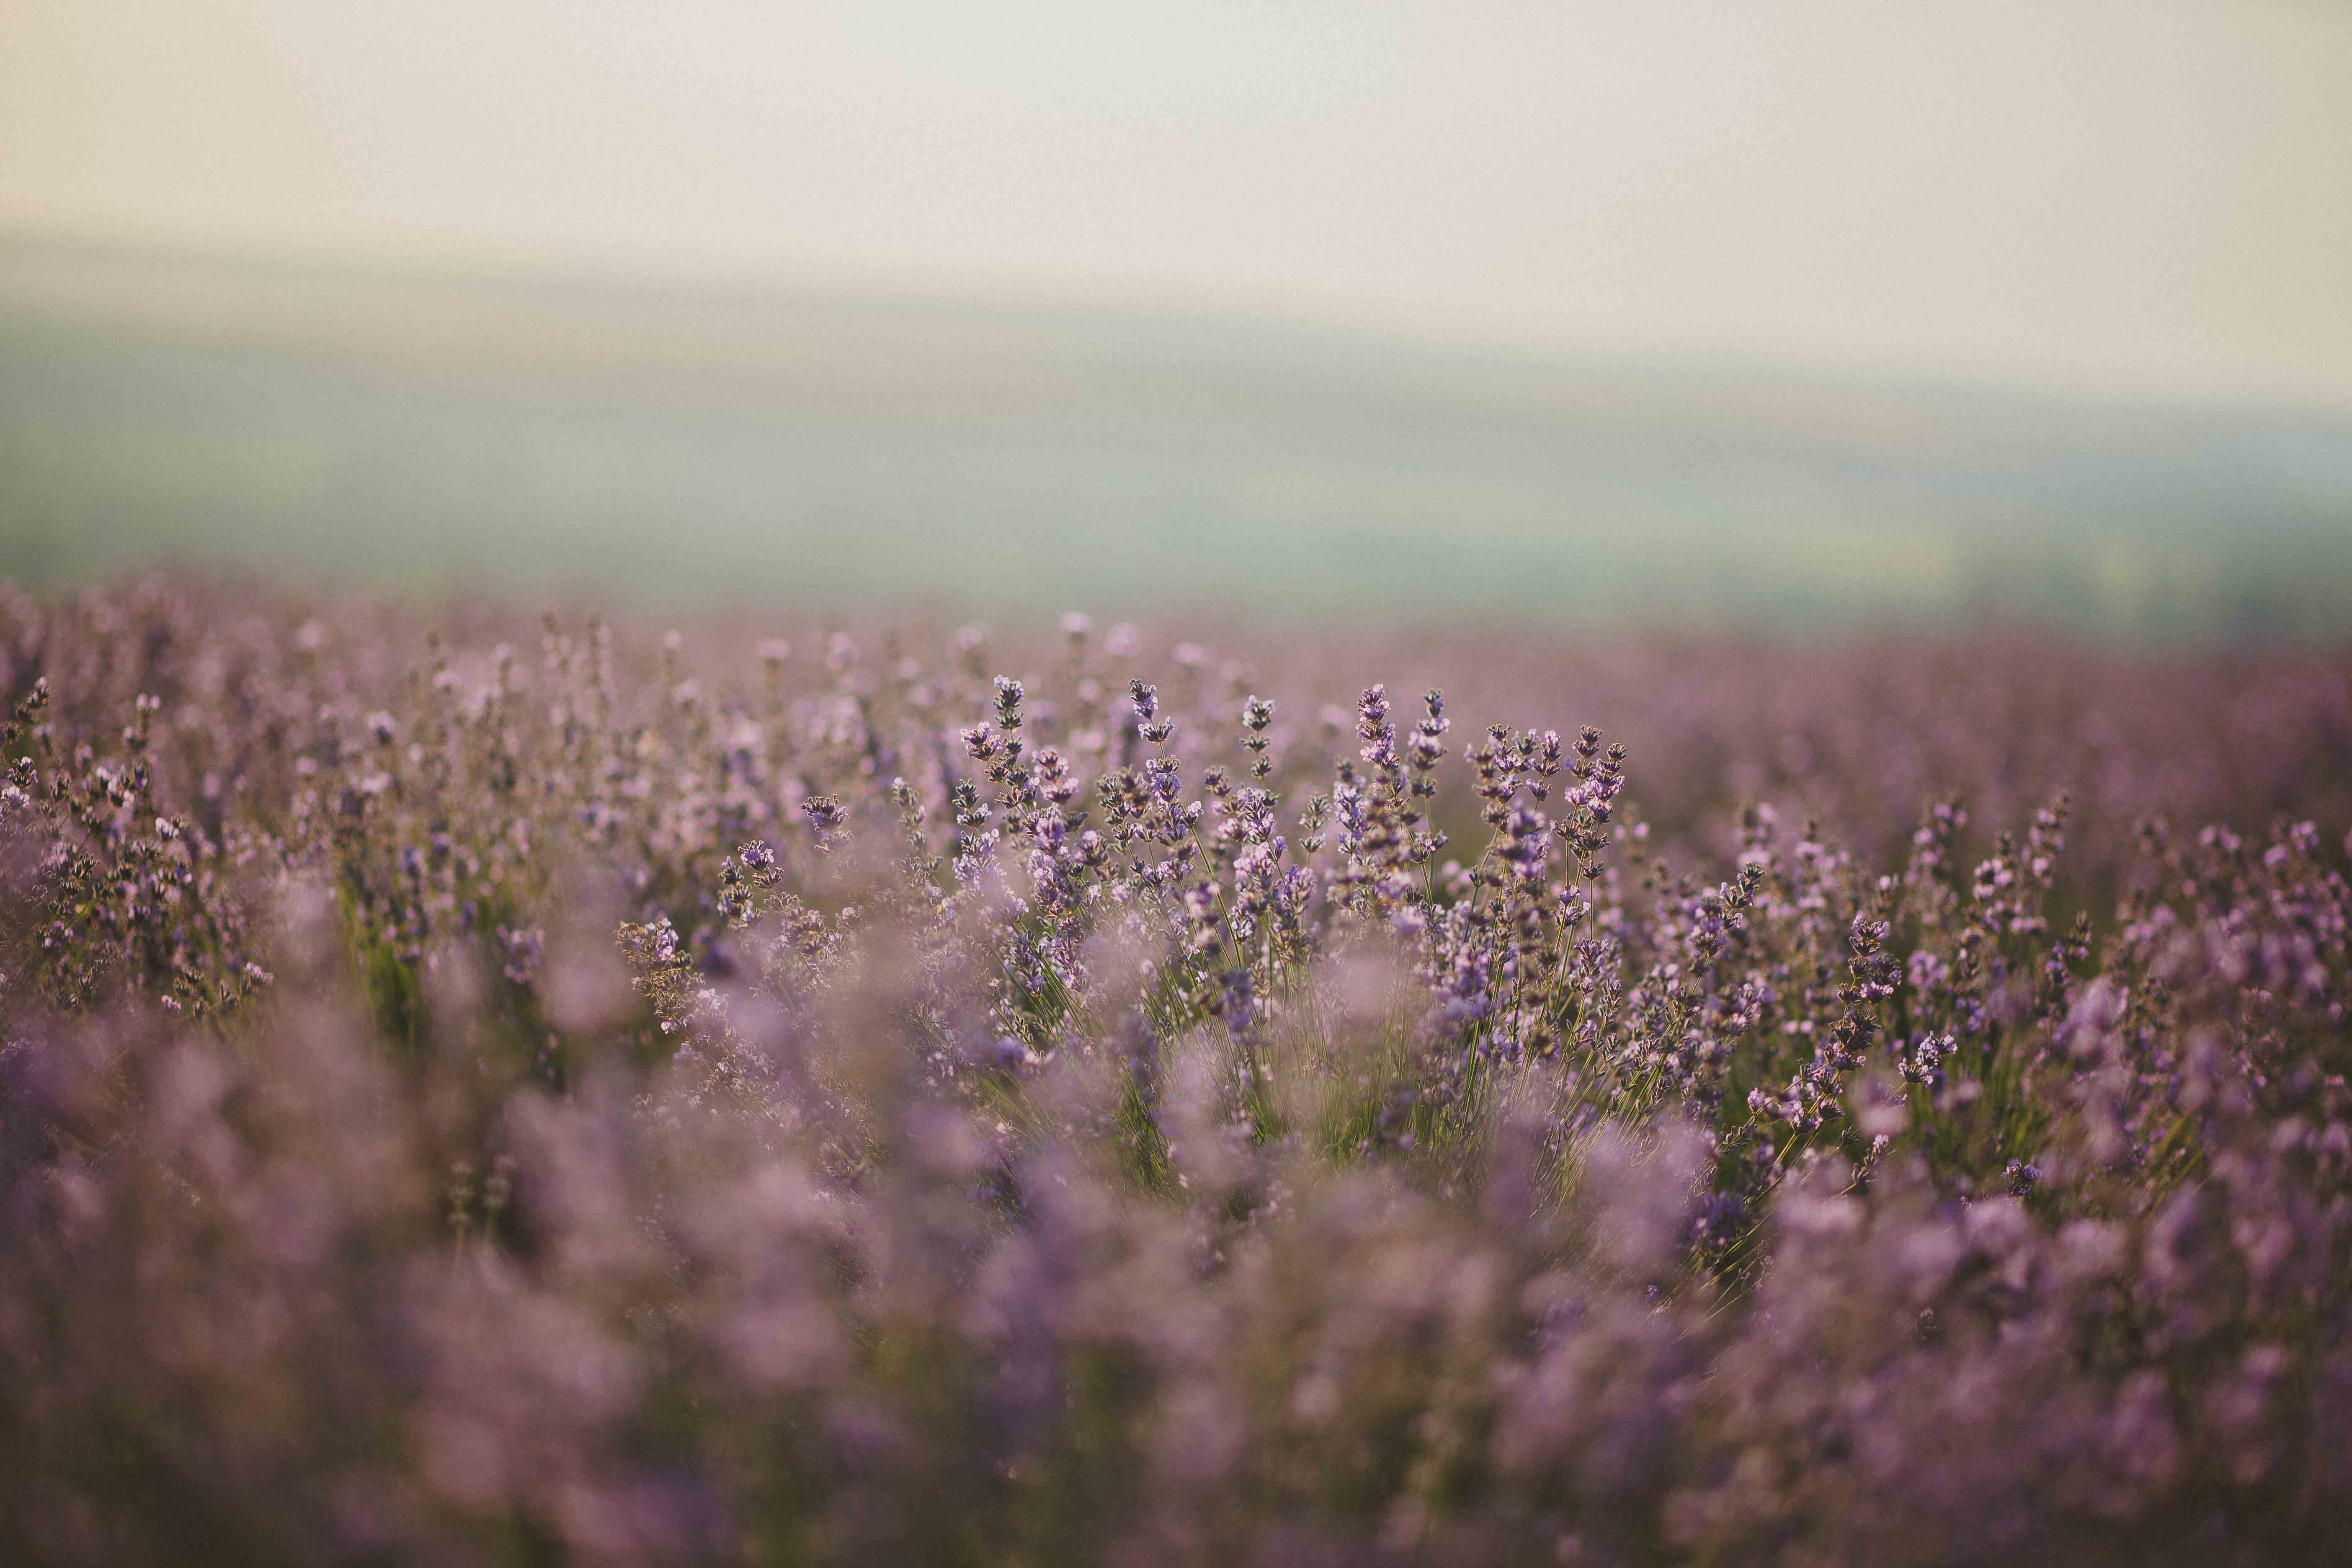 A field of lavender flowers. - Lavender